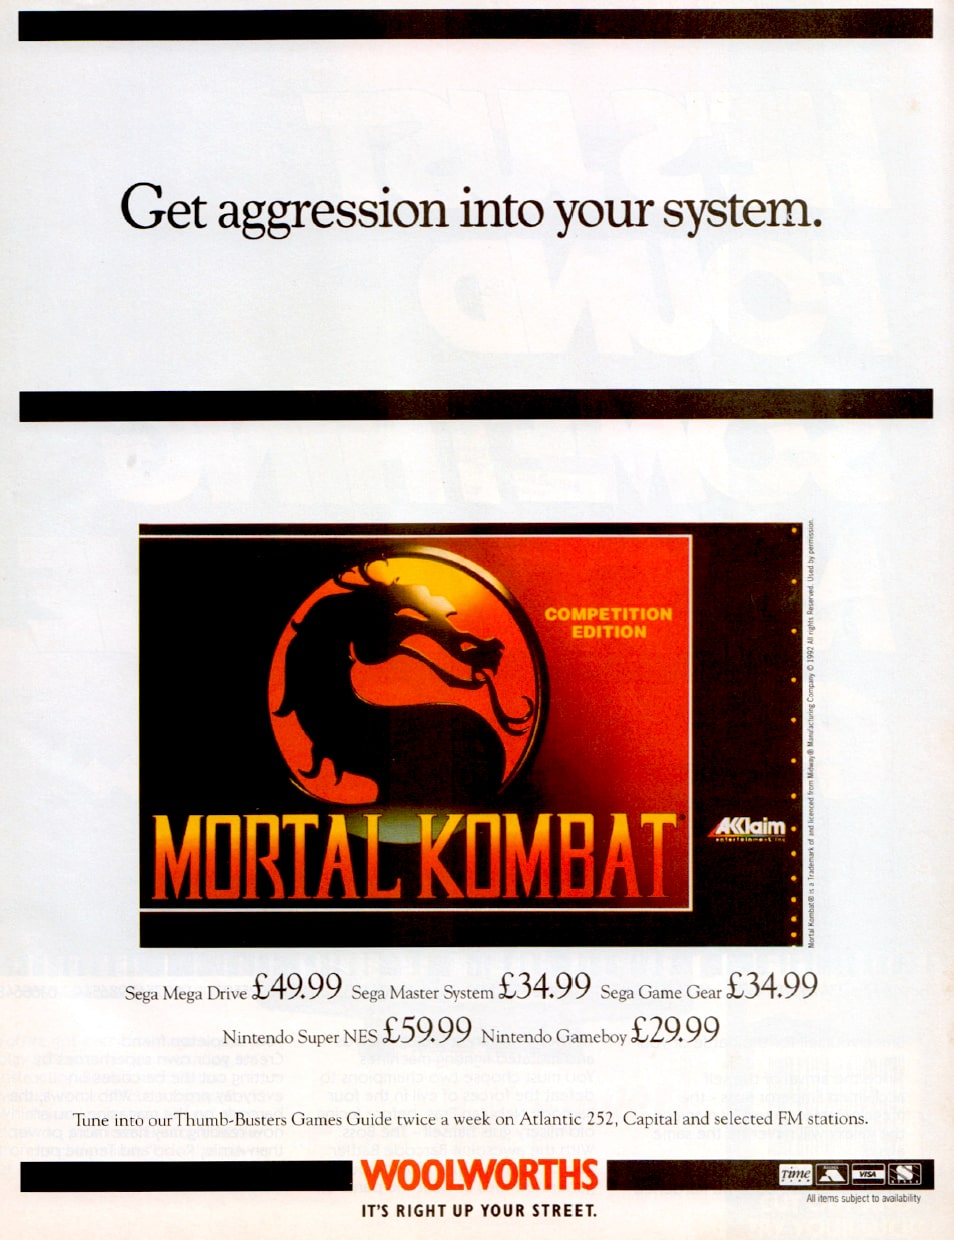 Image For Post | **Hidden Content**  
Mortal Kombat included secret characters, secret games, and other Easter eggs. Popular characters Reptile and Jade were originally introduced as hidden enemies, becoming playable after returning in subsequent games. There is also a hidden game of Pong in Mortal Kombat II, and Mortal Kombat 3 includes a hidden game of Galaga. Many extras in the series have only been accessible through very challenging, demanding, and sometimes coincidental requirements. The Sega Mega Drive/Genesis versions contains a unique finisher, named "Fergality". The Sega Mega-CD version also contained an additional code (known as the "Dad's Code"), which changed the names of the fighters to that of characters from the classic BBC comedy series Dad's Army.
Some Easter eggs originated from in-jokes between members of the development team. One example is "Toasty", which found its way into the game in the form of a small image of sound designer Dan Forden, who would appear in the corner of the screen during gameplay (after performing an uppercut) and yell the phrase "Toasty!", originating from him saying "you're toast". This egg was also the key to unlocking the hidden character Smoke when it happened in the Portal stage in Mortal Kombat II. In Mortal Kombat 4, Forden would say "Toasty! 3D!" after Scorpion did his burn Fatality, a reference to the fact that it is the first 3D game of the series. "Toasty!" is also found in Mortal Kombat: Shaolin Monks, appearing randomly after the character pulls off a chain of hits, though the picture of Forden was removed for that title, but brought back for the 2011 Mortal Kombat game. Yet another private joke was the hidden character Noob Saibot, who has appeared in various versions of the game starting with Mortal Kombat II. The character's name derived from two of the series' creators' surnames, Ed Boon and John Tobias, spelled backwards. In addition, a counter for ERMACS on the game's audits screen (ERMACS being short for error macros), was interpreted by some players as a reference to a hidden character in the original Mortal Kombat. The development team decided to turn the rumor into reality, introducing Ermac in Ultimate Mortal Kombat 3 as an unlockable secret character. The character Mokap, introduced in Mortal Kombat: Deadly Alliance, is a tribute to Carlos Pesina, who played Raiden in MK and MKII and has served as a motion capture actor for subsequent titles in the series.